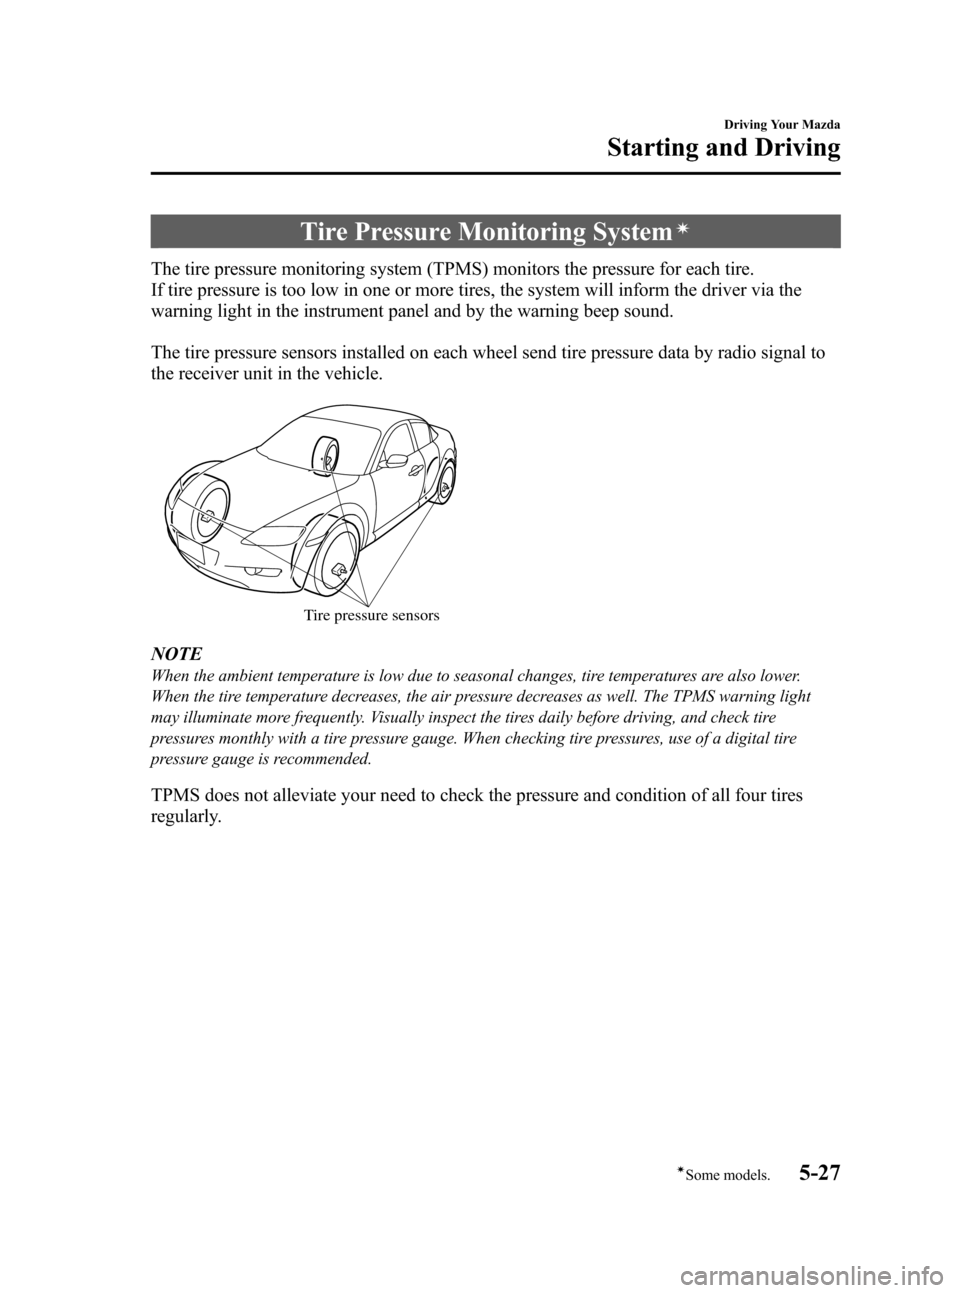 MAZDA MODEL RX 8 2008  Owners Manual (in English) Black plate (153,1)
Tire Pressure Monitoring Systemí
The tire pressure monitoring system (TPMS) monitors the pressure for each tire.
If tire pressure is too low in one or more tires, the system will 